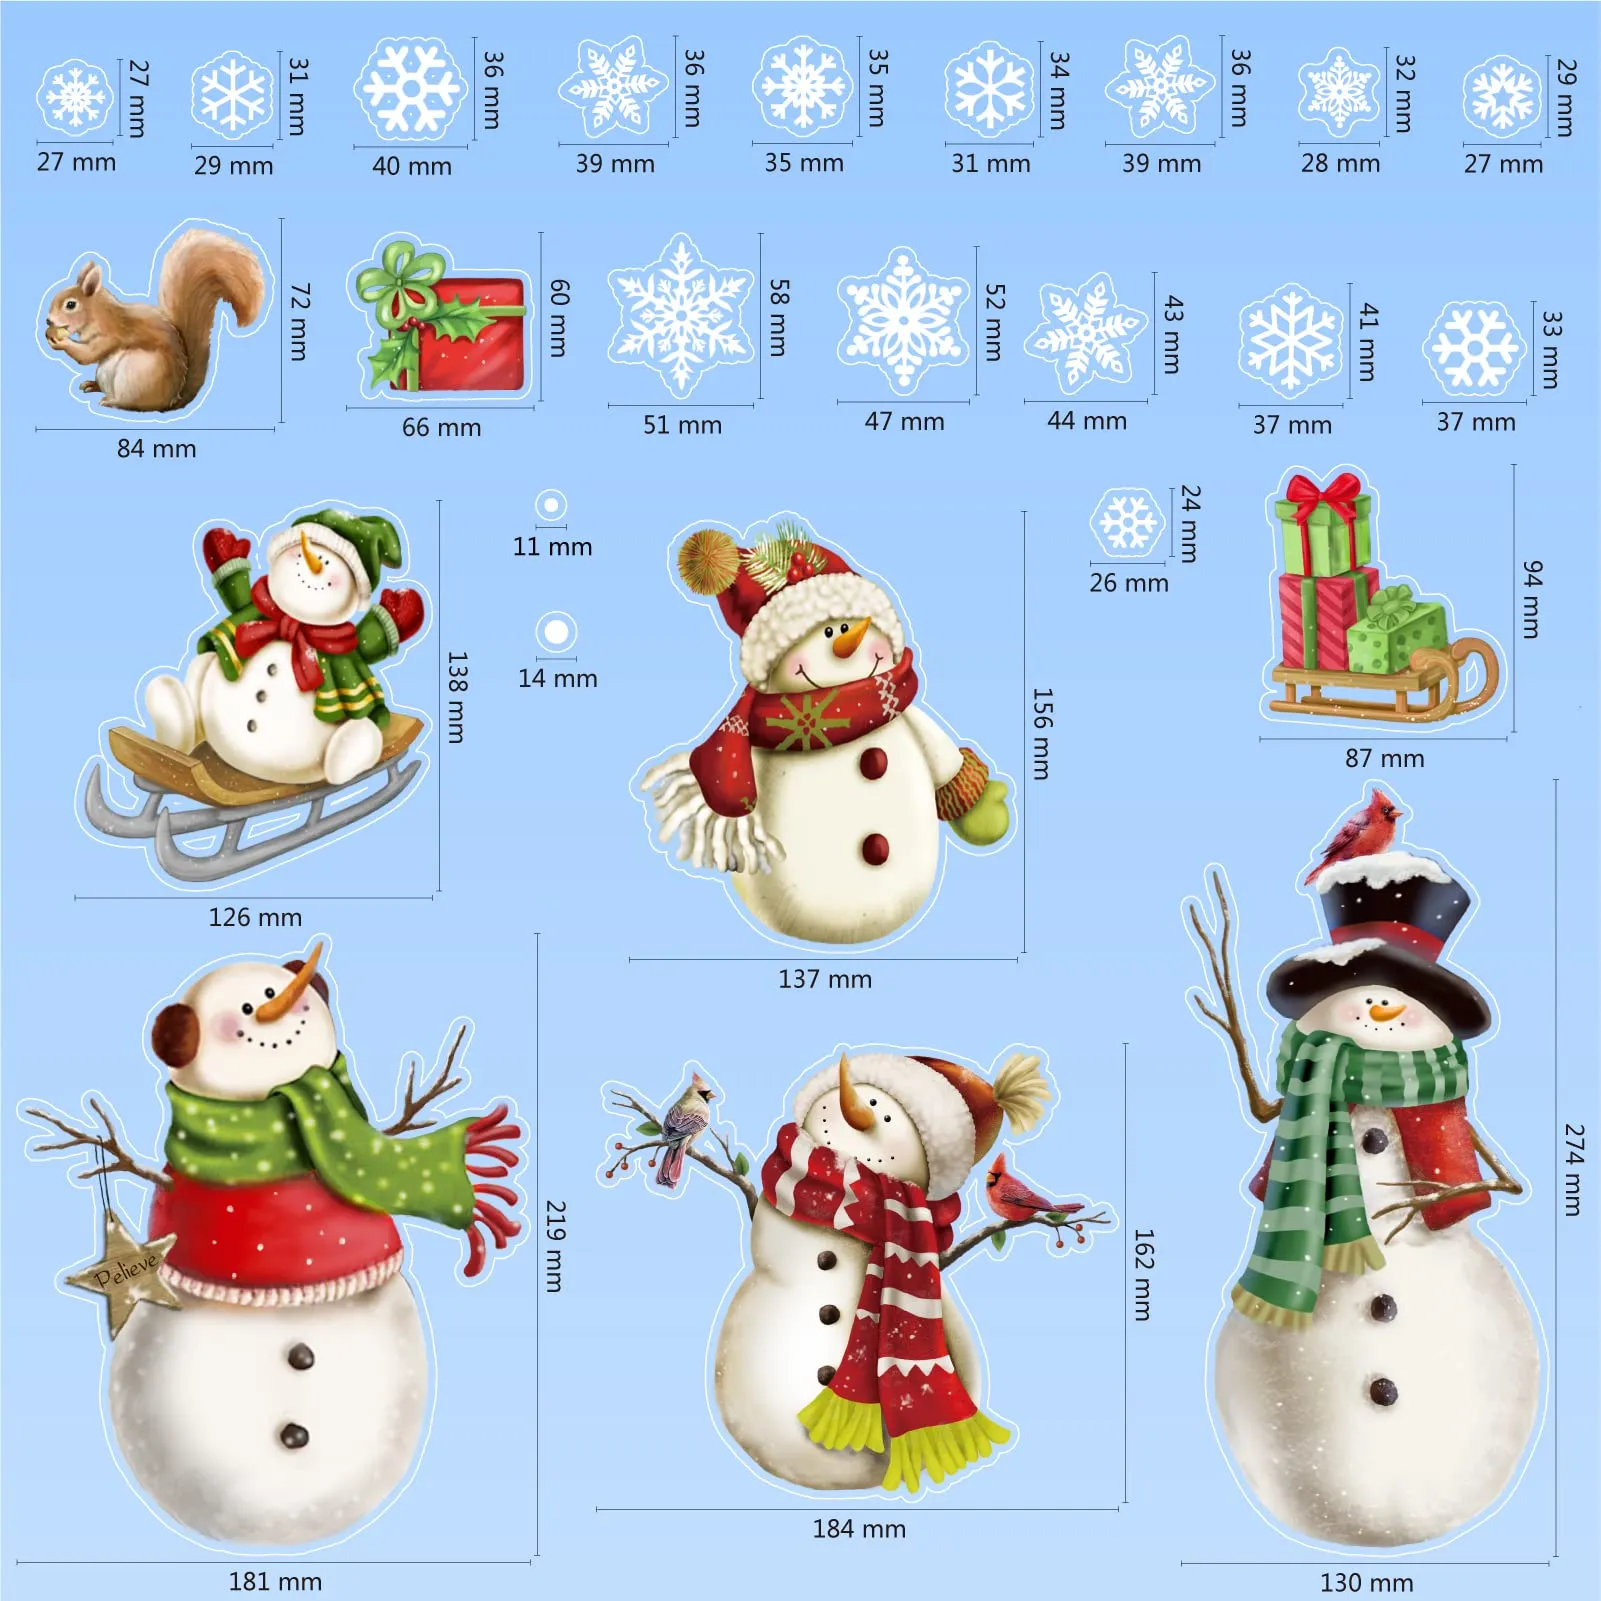 christmas snowflake christmas windows clings stickers snowman window decals white snowflake window clings stickers for windows glass pvc static christmas window stickers for winter party christmas decorations holiday christmas